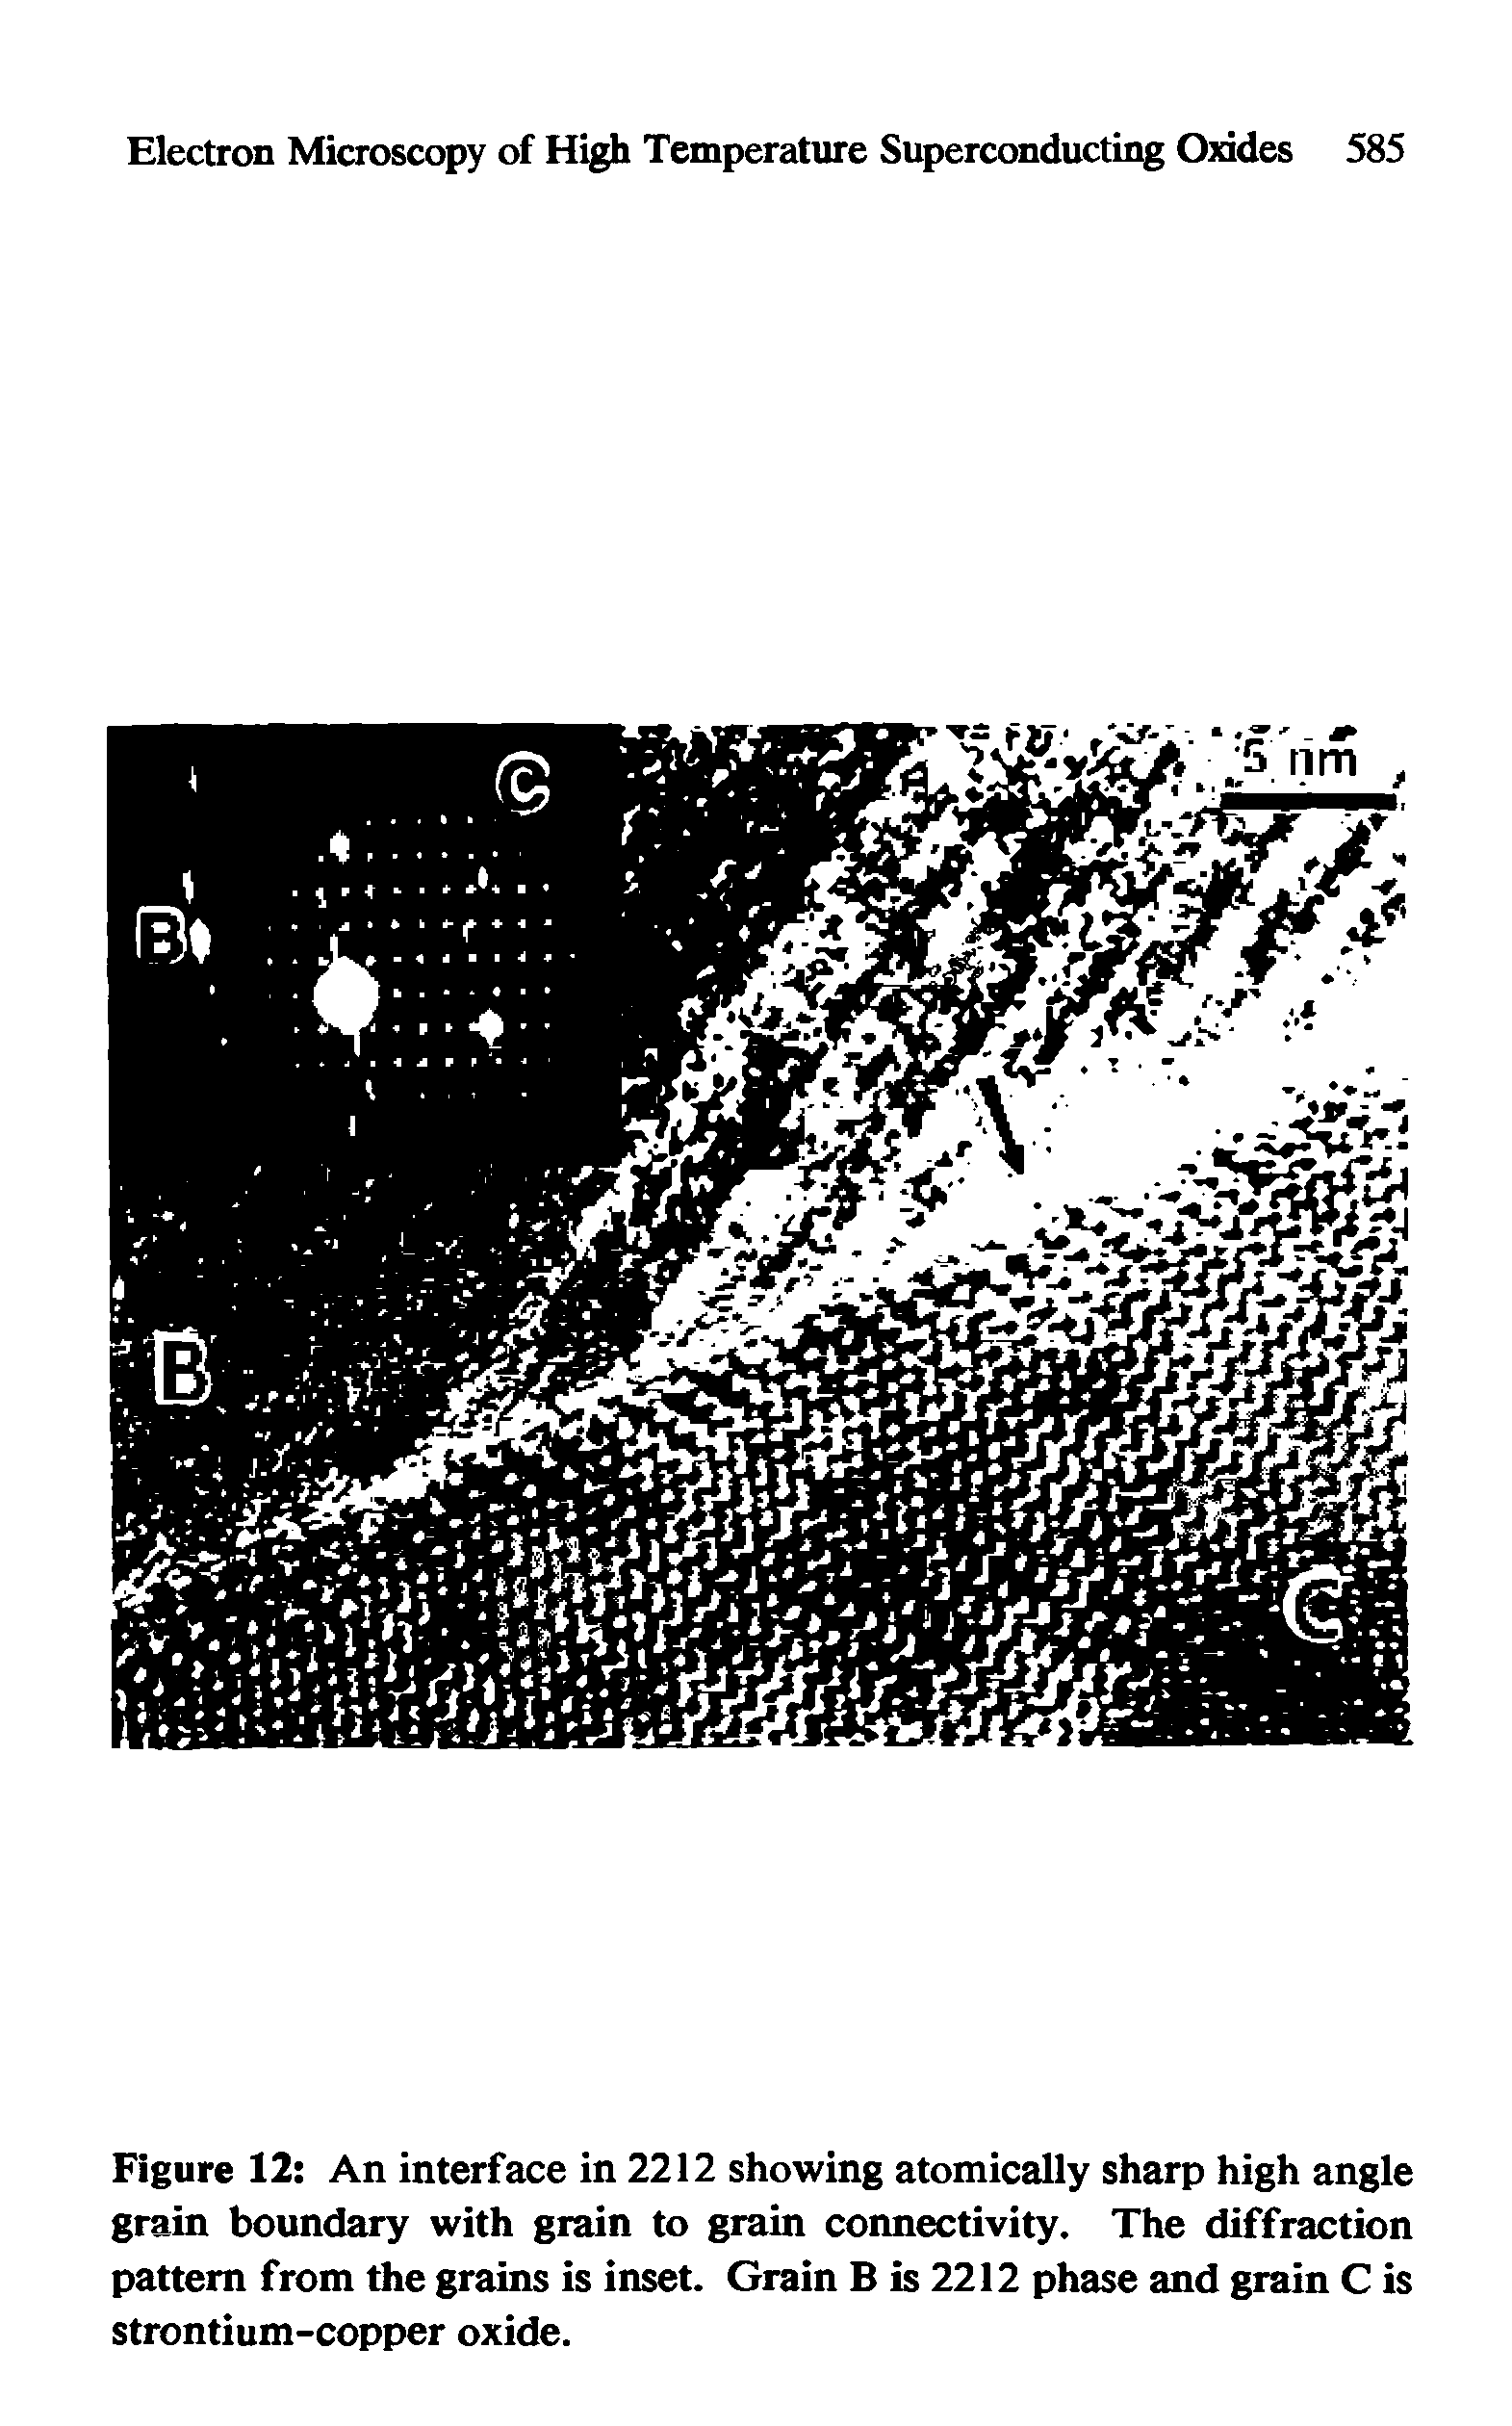 Figure 12 An interface in 2212 showing atomically sharp high angle grain boundary with grain to grain connectivity. The diffraction pattern from the grains is inset. Grain B is 2212 phase and grain C is strontium-copper oxide.